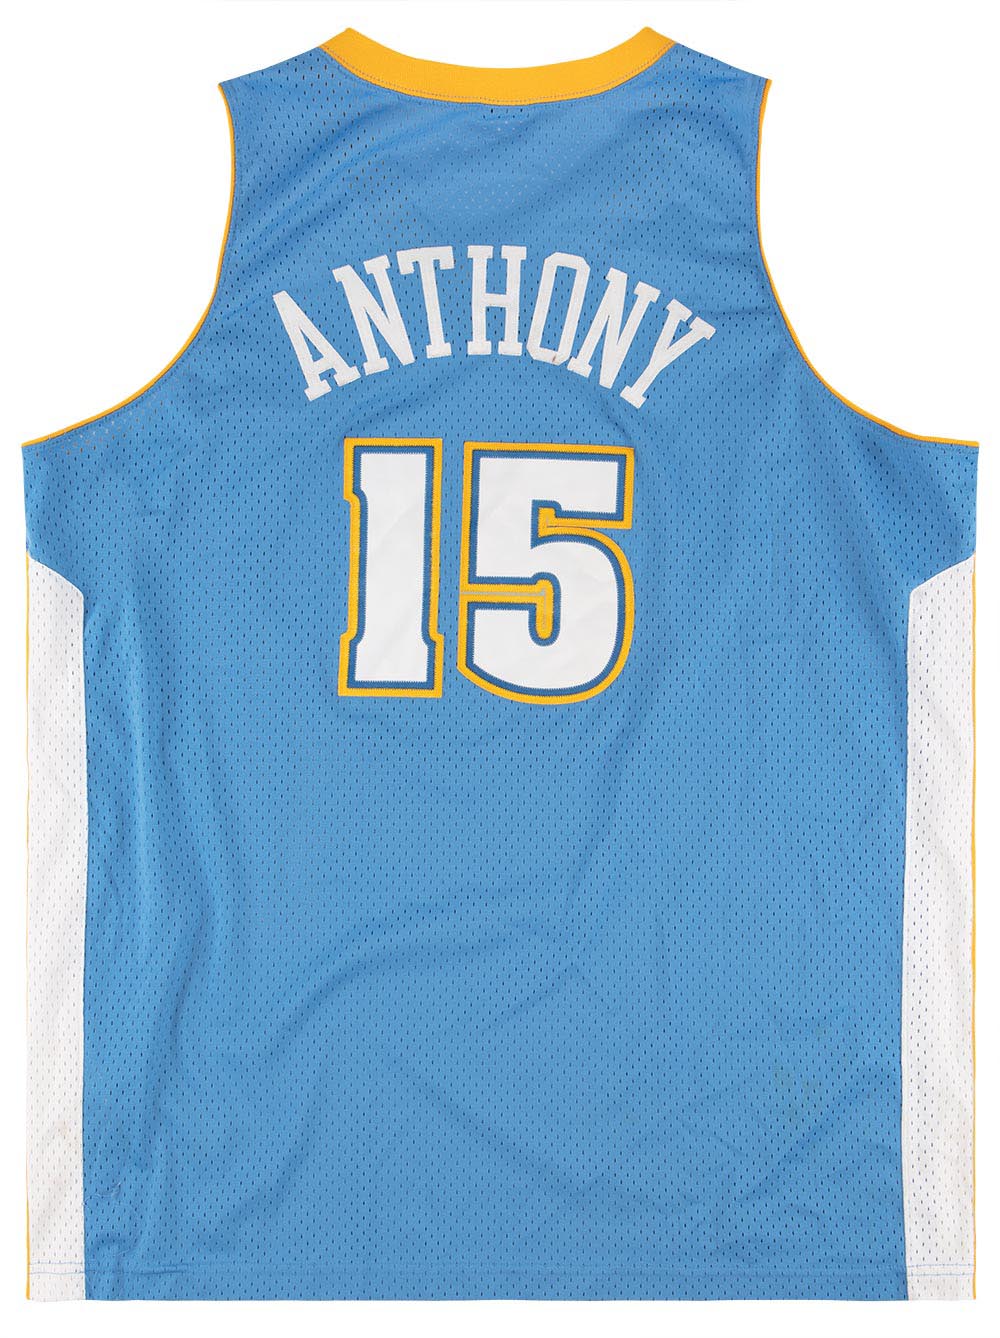 2003-04 DENVER NUGGETS ANTHONY #15 NIKE SWINGMAN JERSEY (AWAY) Y - Classic  American Sports